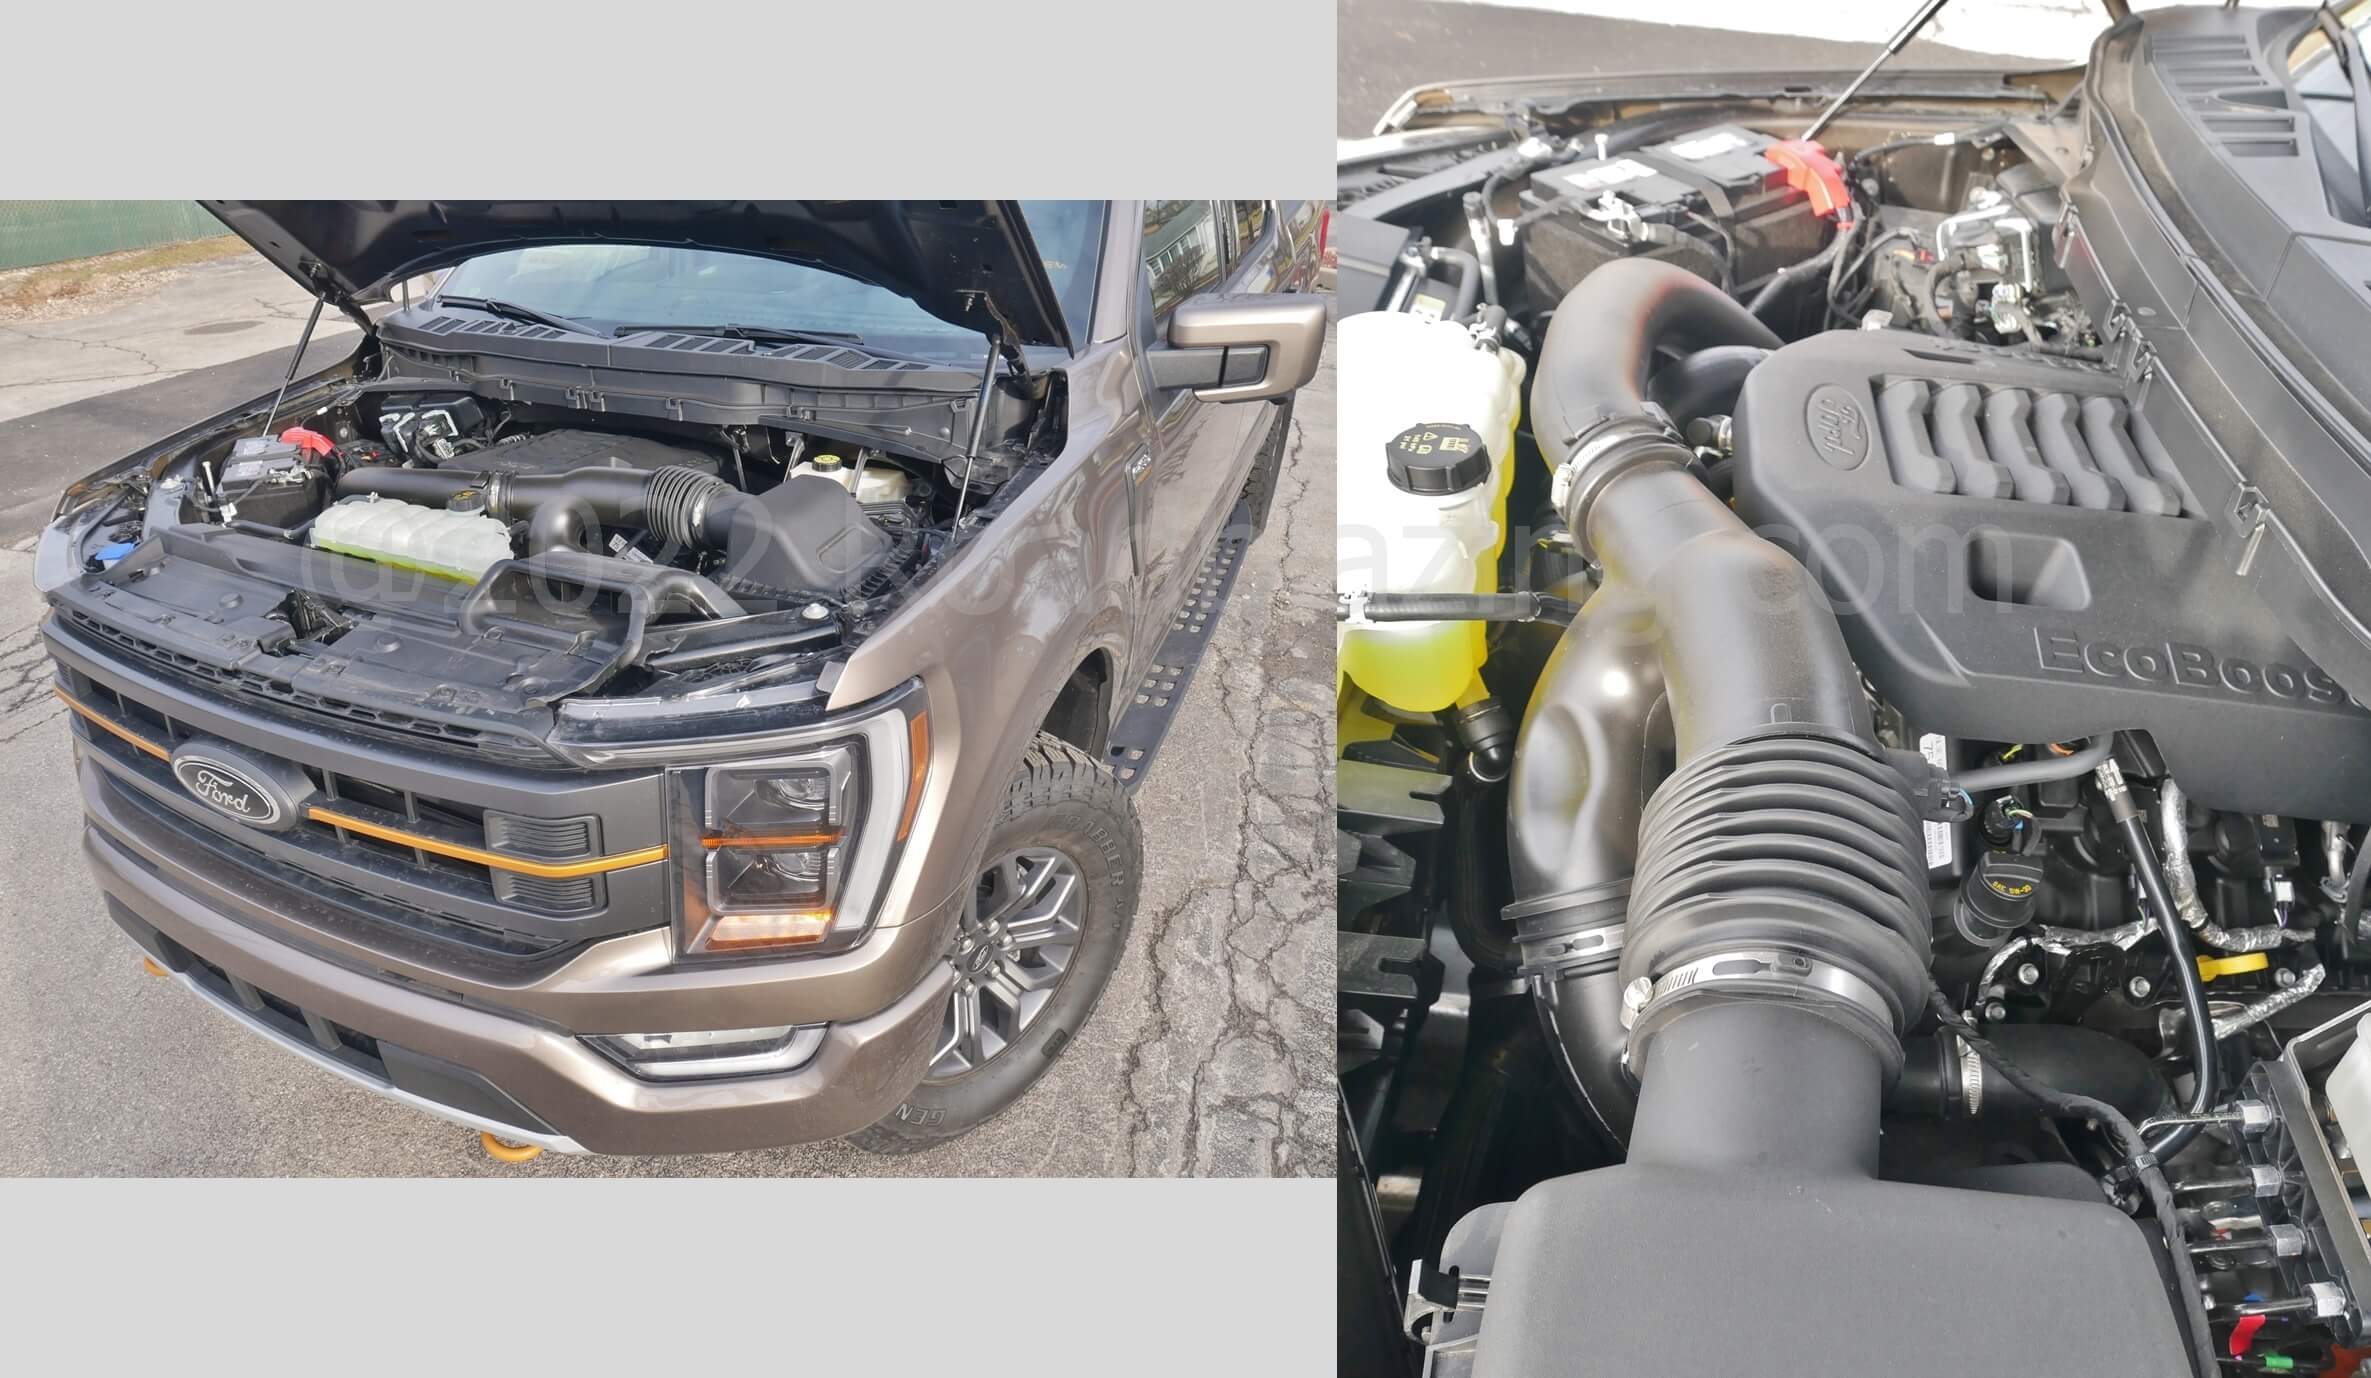 2021 Ford F-150 SuperCrew Tremor 4x4: EcoBoost gas 3.5L V-6 boasts 500 lb-ft twist through a 10-speed automatic transmission + 2-speed 4x4 transfer case w/ Torsen limited slip rear differential